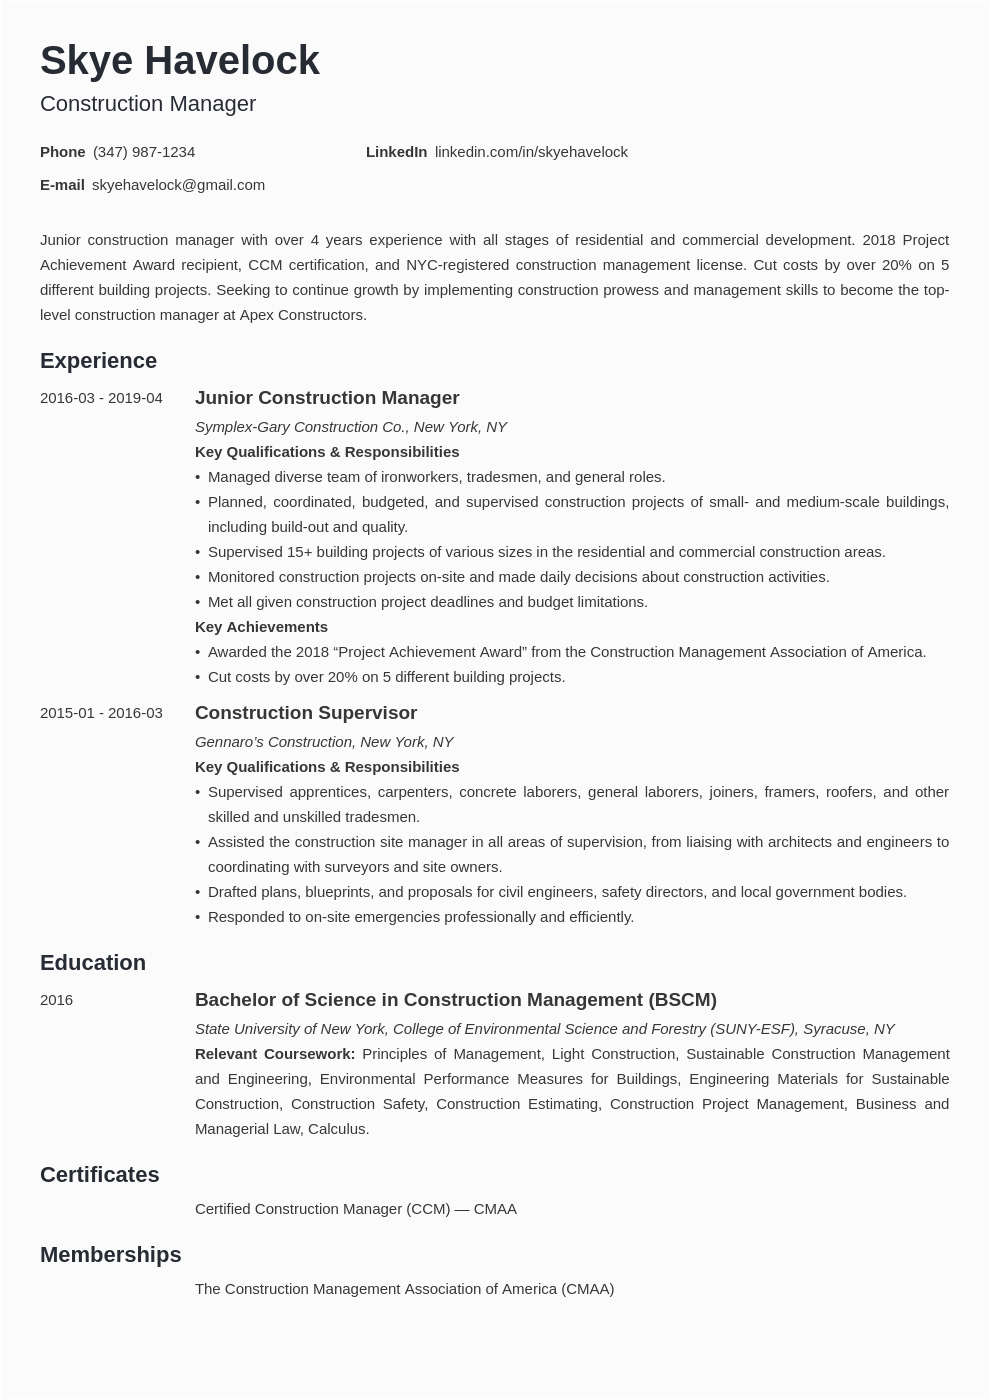 Construction Management Resume Examples and Samples Construction Manager Resume